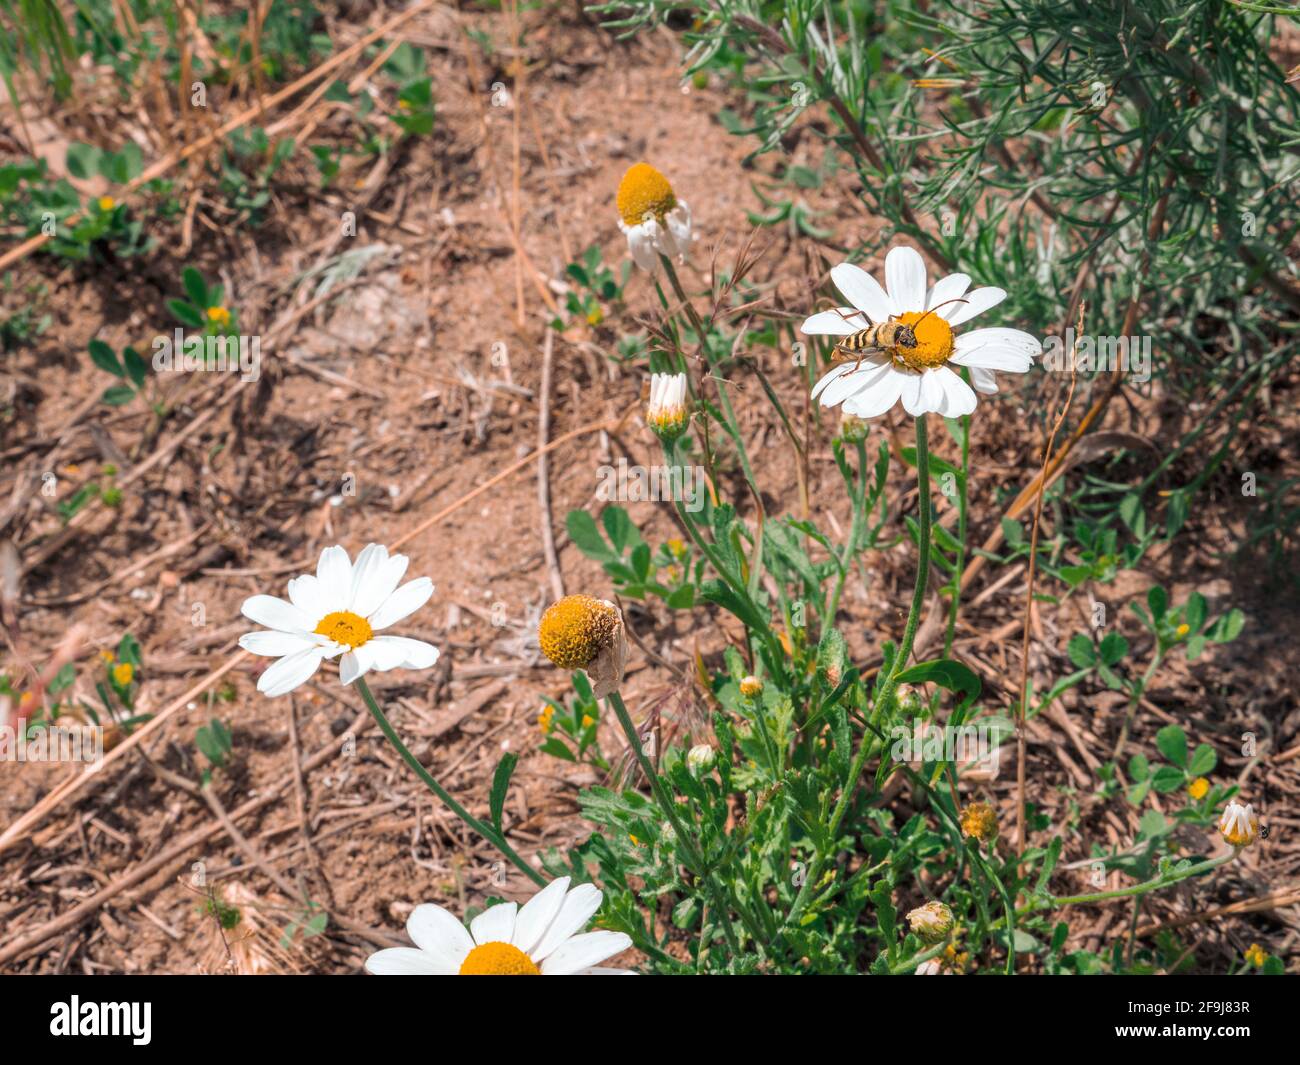 Striped wasp sitting on a yellow center of camomile flower growing outdoors near the country road on a sunny day. Stock Photo